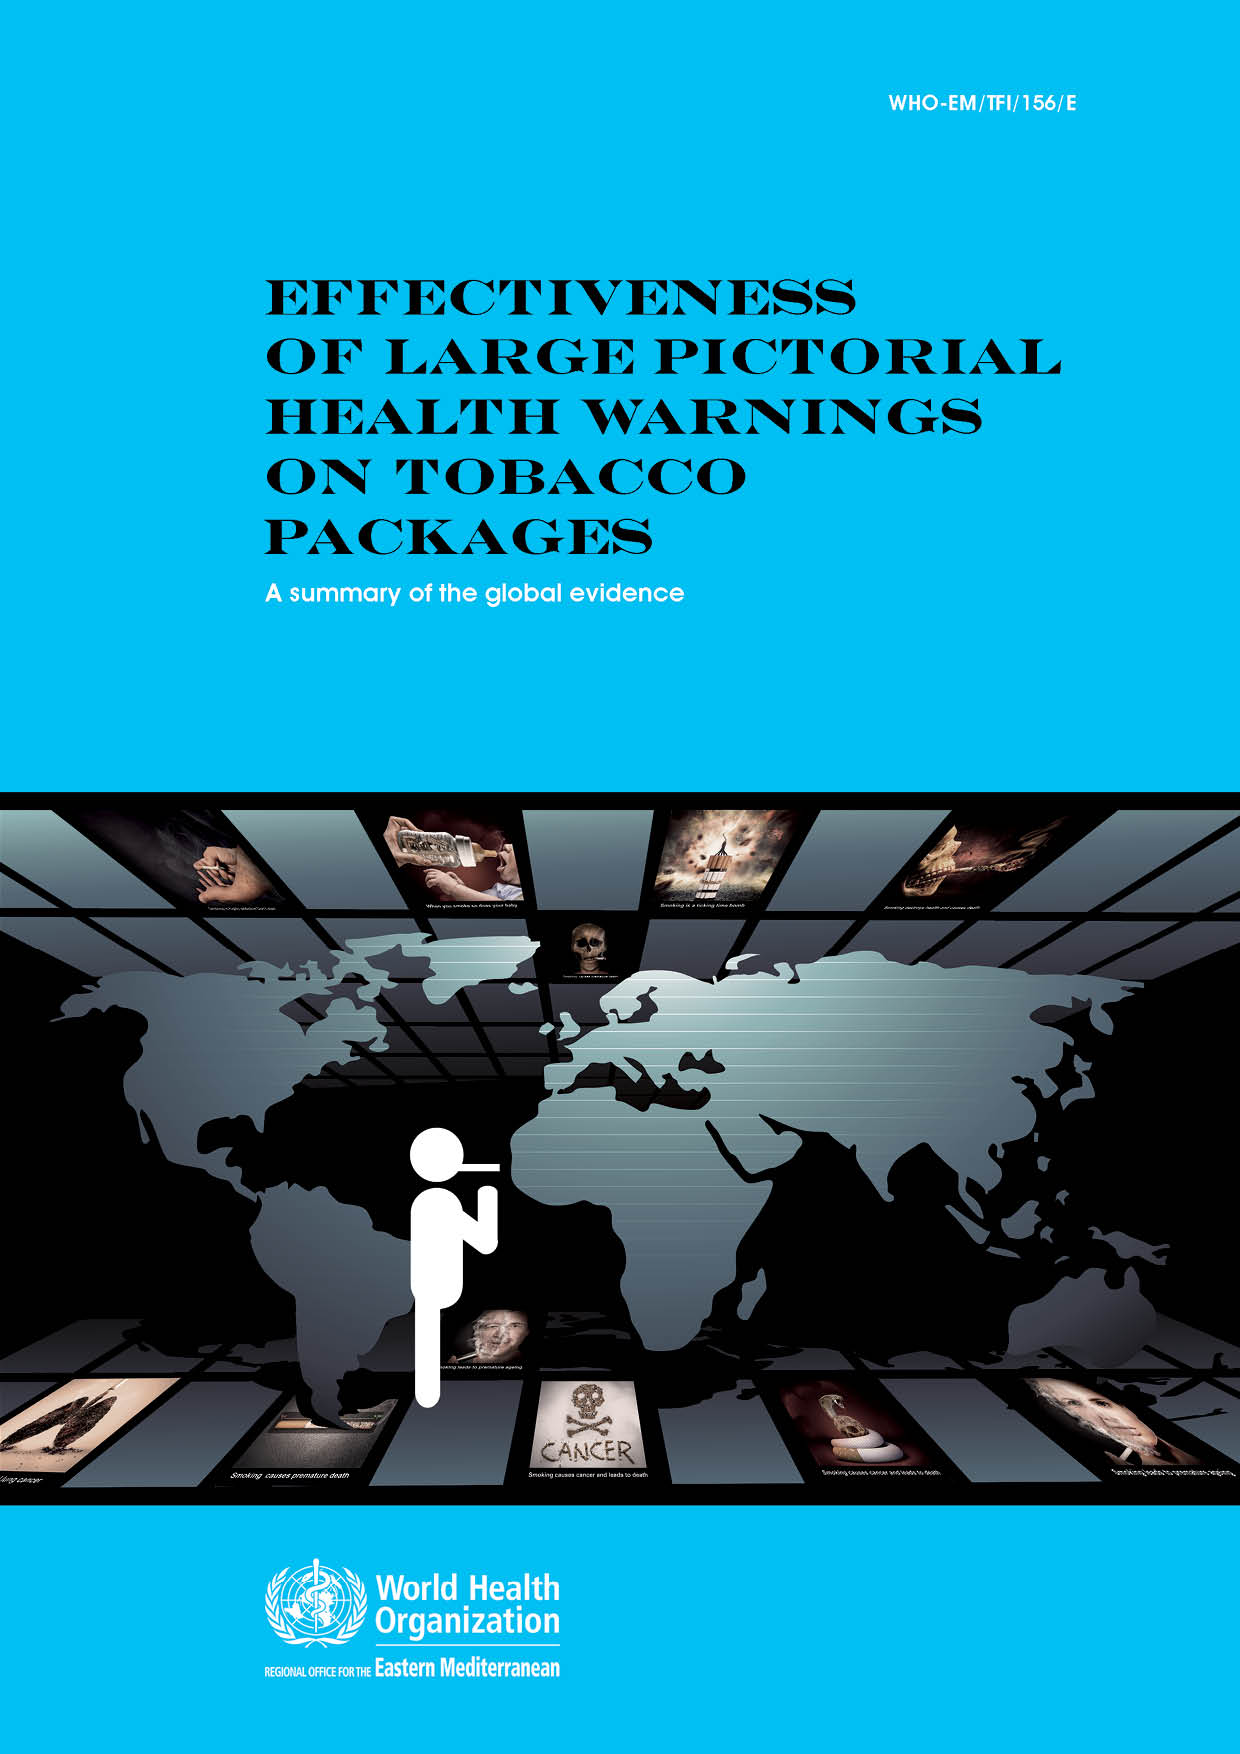 Effectiveness of large pictorial health warnings on tobacco packages: A summary of the global evidence